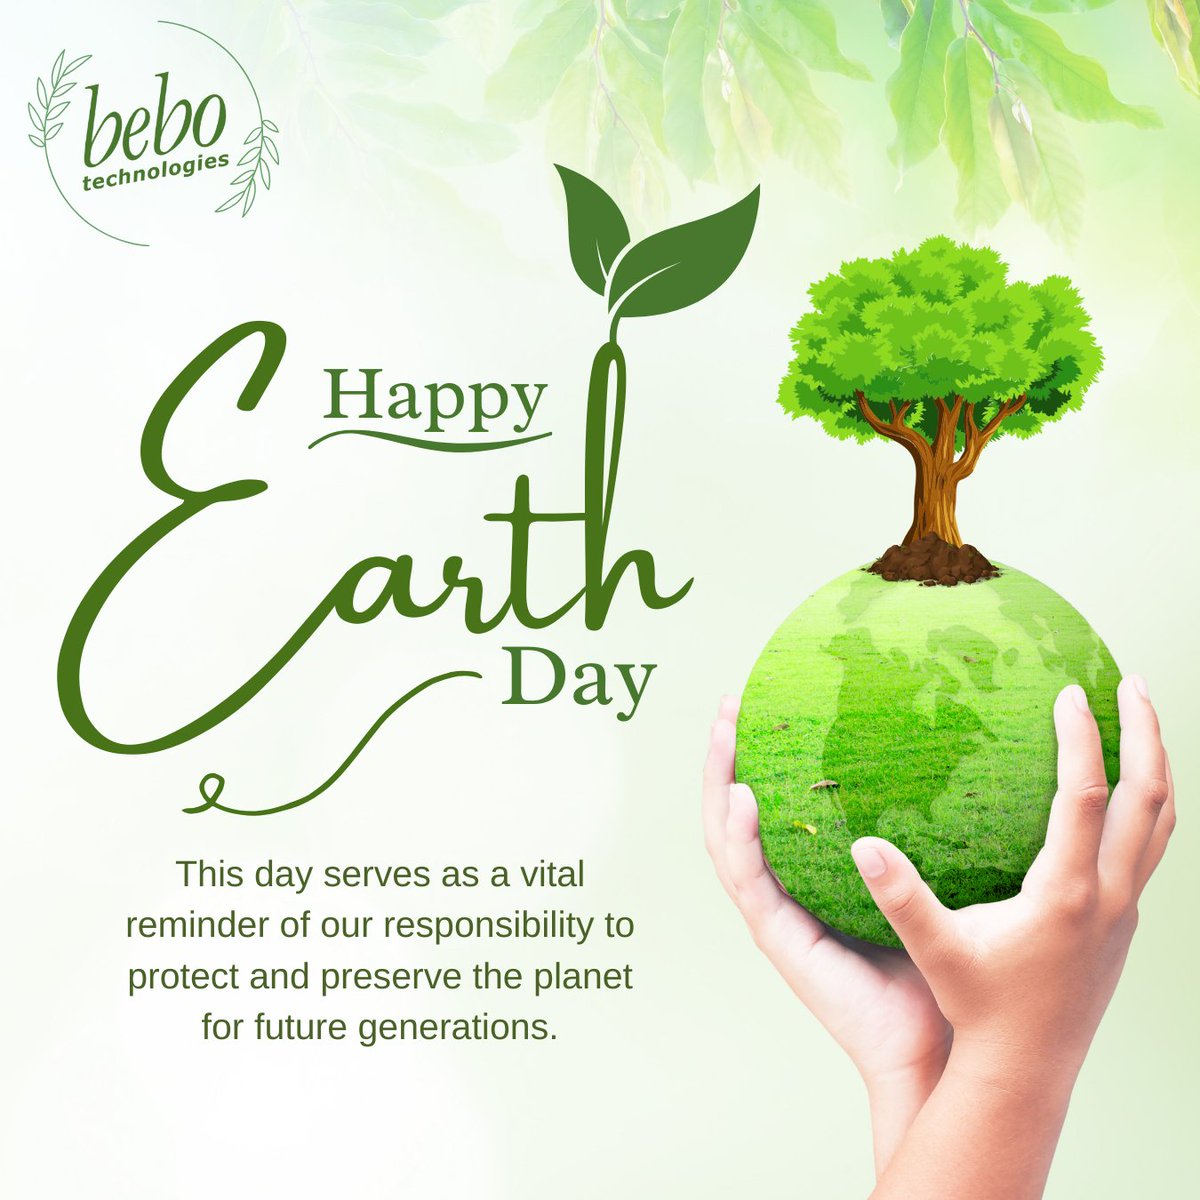 Join bebo Technologies in honoring Earth Day by embracing eco-friendly practices and promoting environmental awareness. Together, we can protect our planet.

#EarthDay #EarthDay2024 #ProtectOurPlanet #GoGreen #beboTechnologies